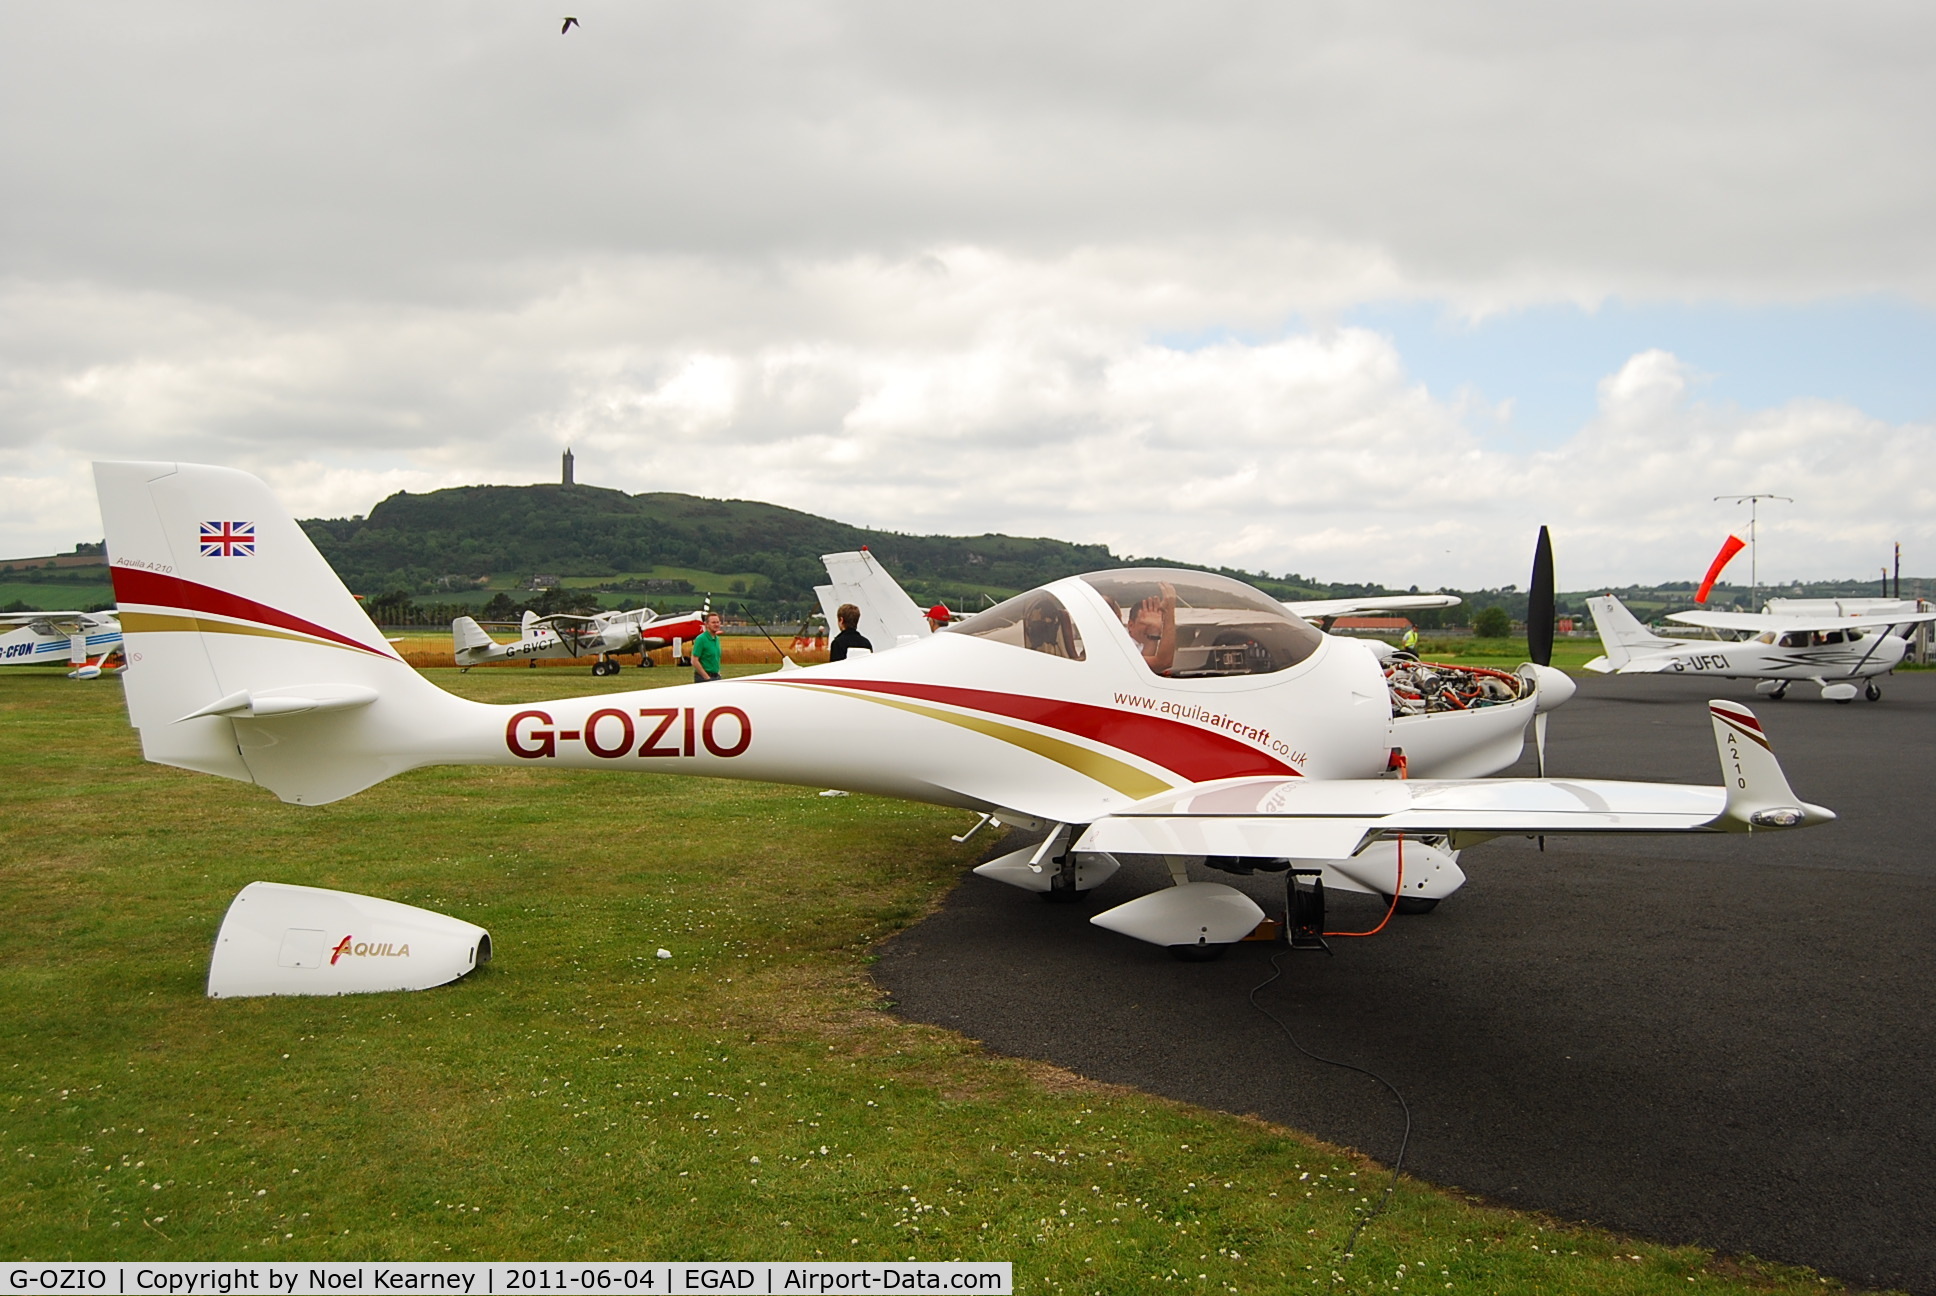 G-OZIO, 2009 Aquila A210 (AT01) C/N AT01-199, Parked on the apron at Newtownards Airfield.